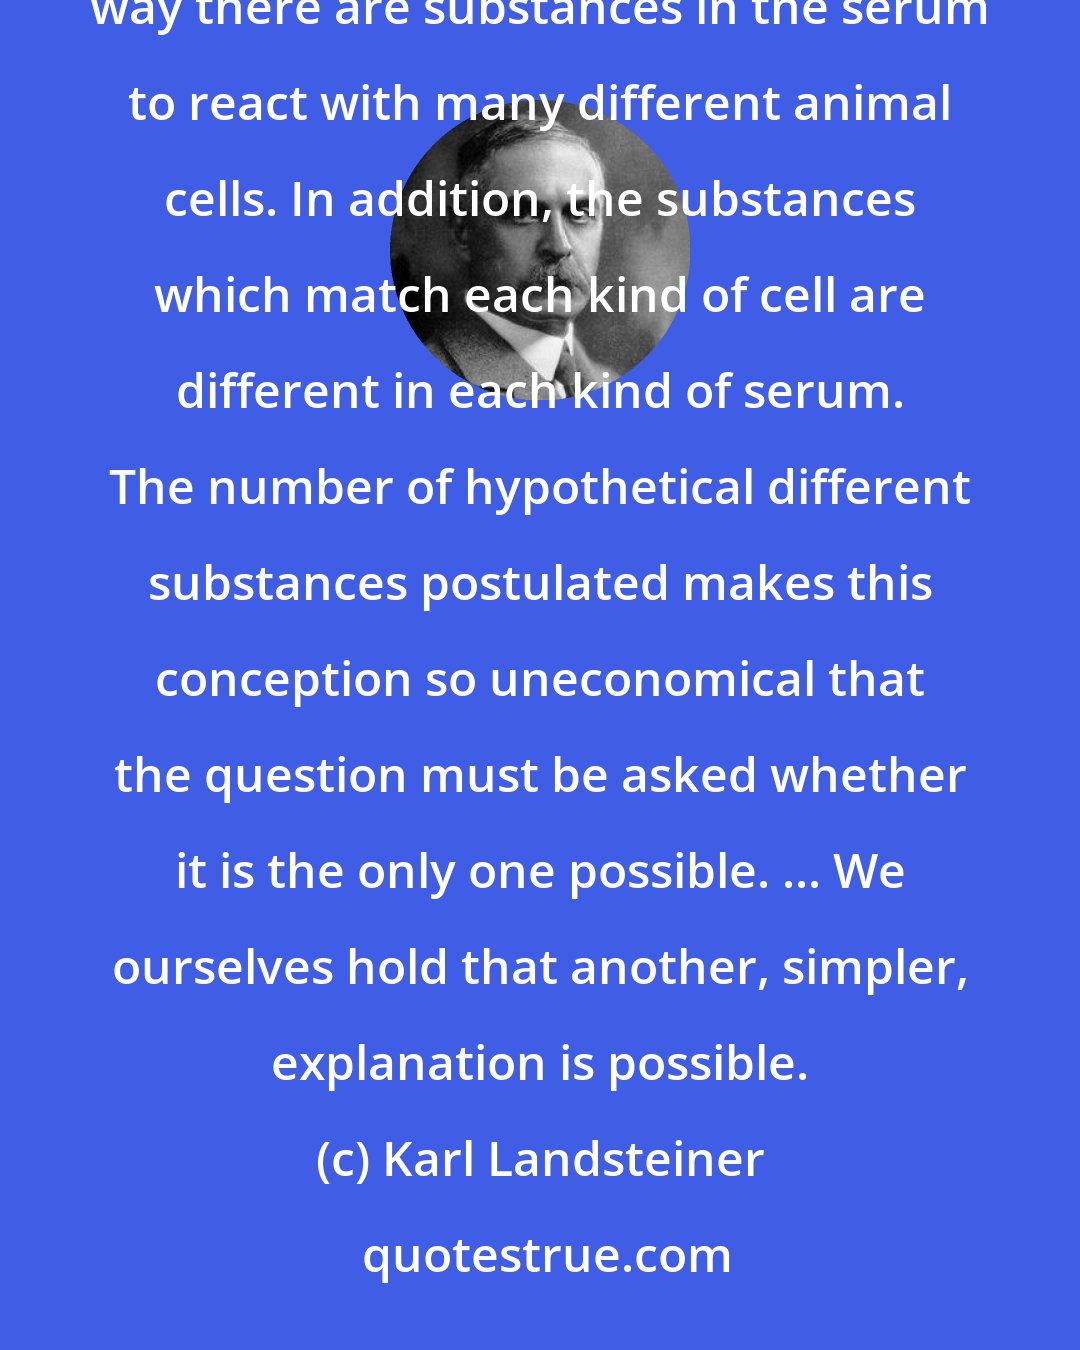 Karl Landsteiner: A single kind of red cell is supposed to have an enormous number of different substances on it, and in the same way there are substances in the serum to react with many different animal cells. In addition, the substances which match each kind of cell are different in each kind of serum. The number of hypothetical different substances postulated makes this conception so uneconomical that the question must be asked whether it is the only one possible. ... We ourselves hold that another, simpler, explanation is possible.